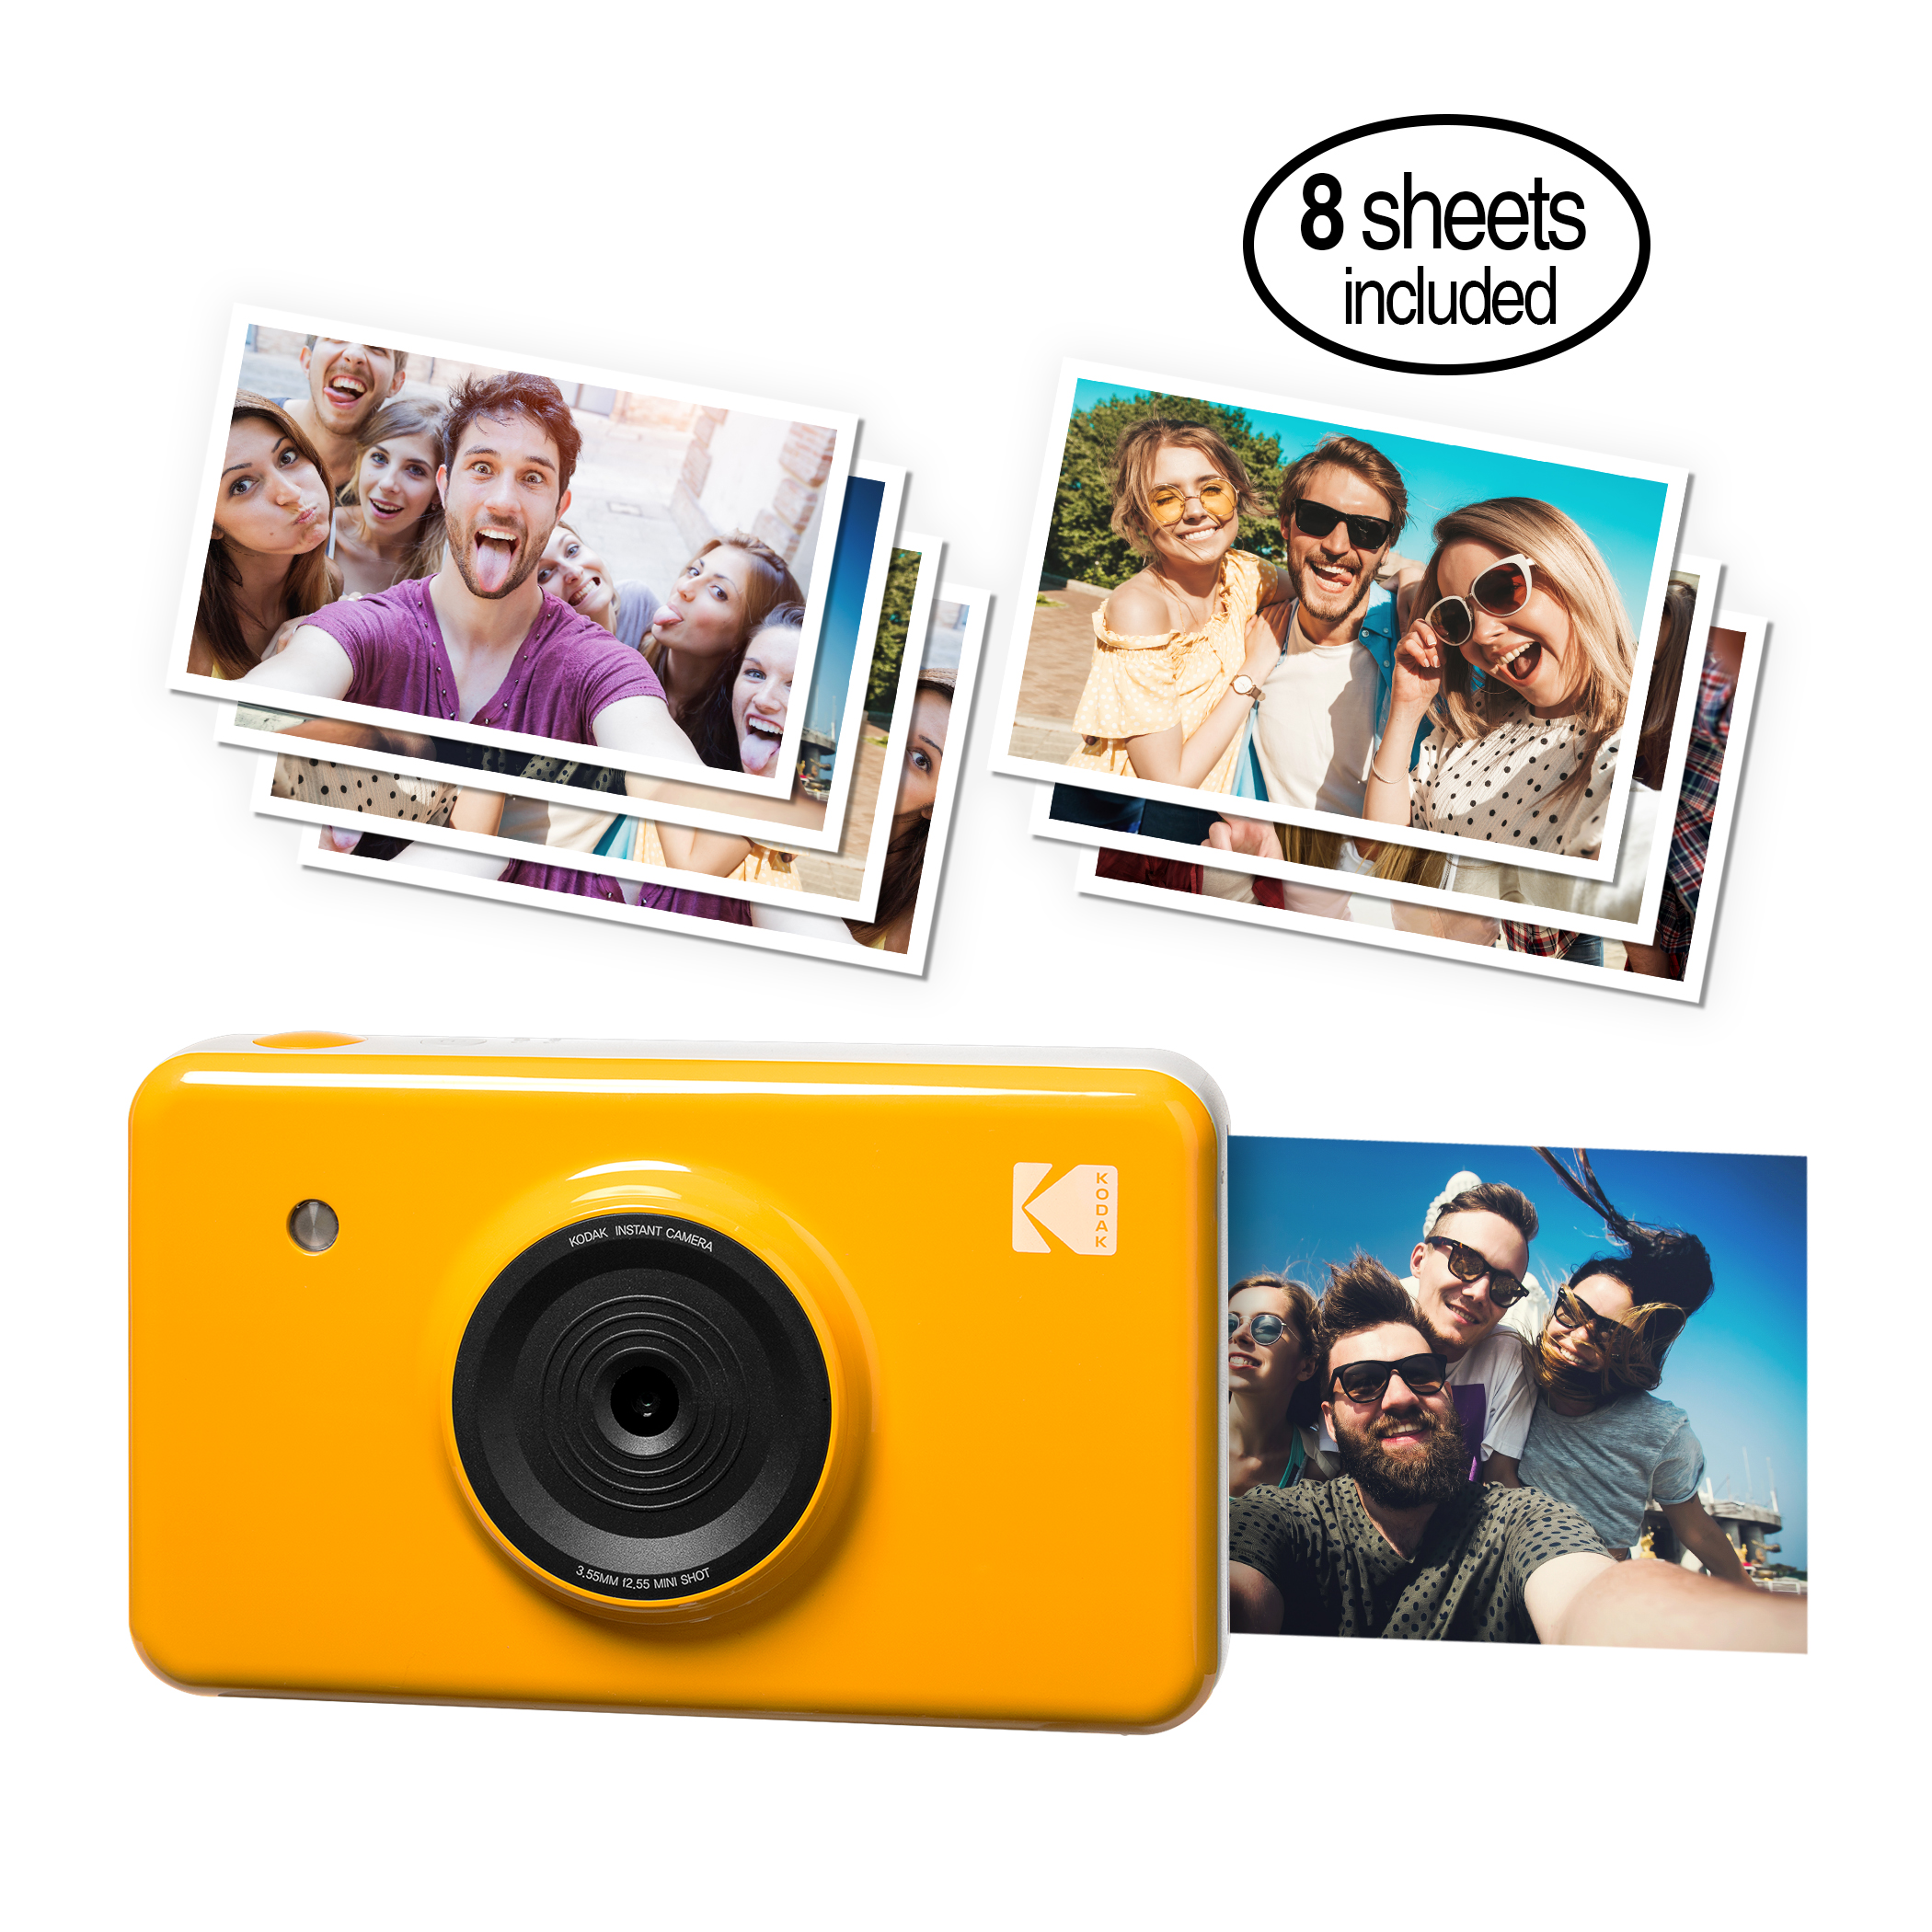 Kodak Mini Shot Instant Film Camera and Photo Printer, includes 8 Prints | Wirelessly Print from your Mobile Device, Full Color 4-Pass Printing, LCD viewfinder | Compatible w/ iOS & Android (Yellow) - image 1 of 3